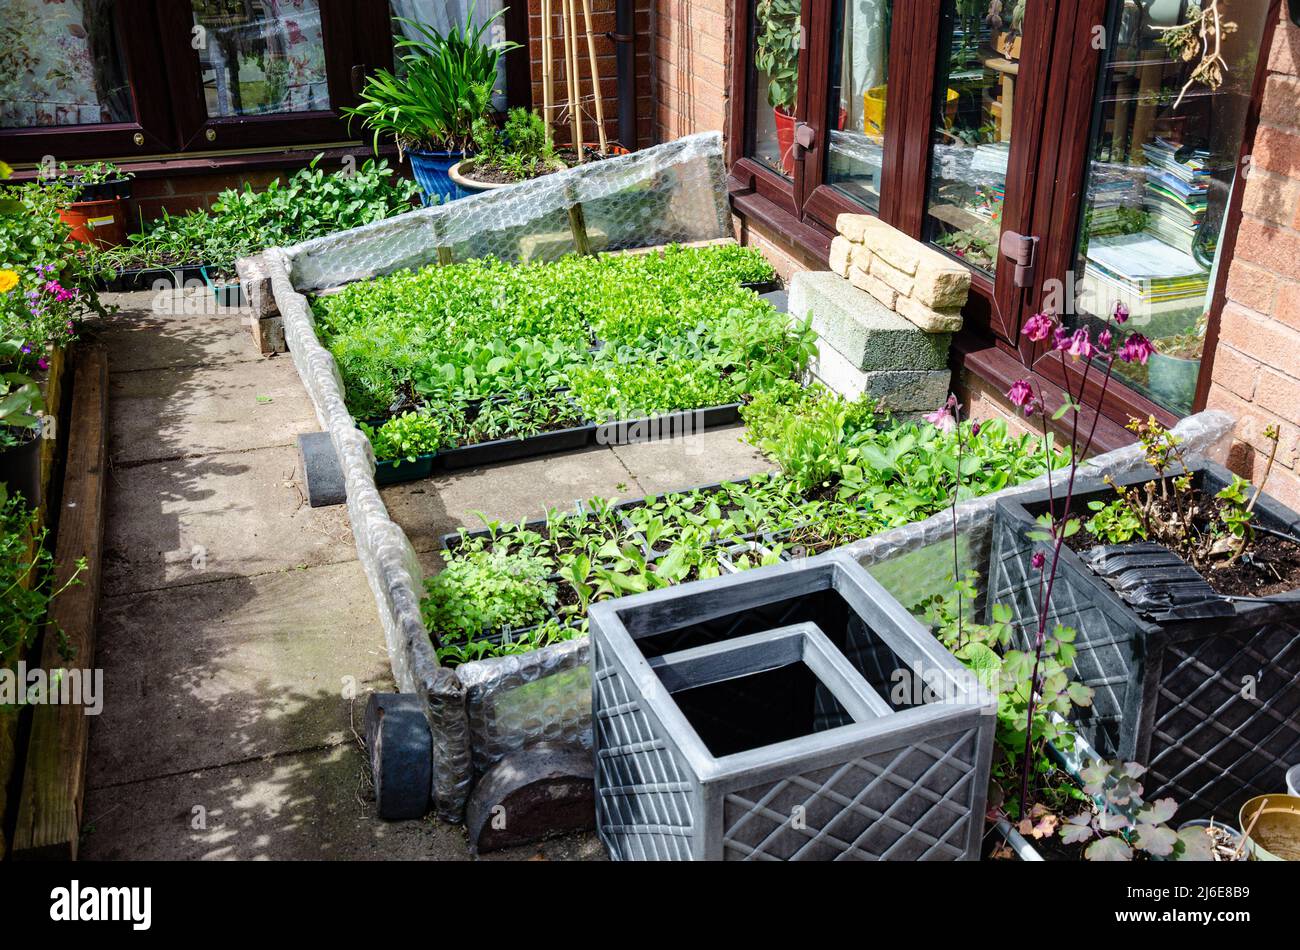 Seed trays with young plants in a hoe made cold frame, improvised out of wooden battens and bubble wrap on a patio in a garden. Stock Photo